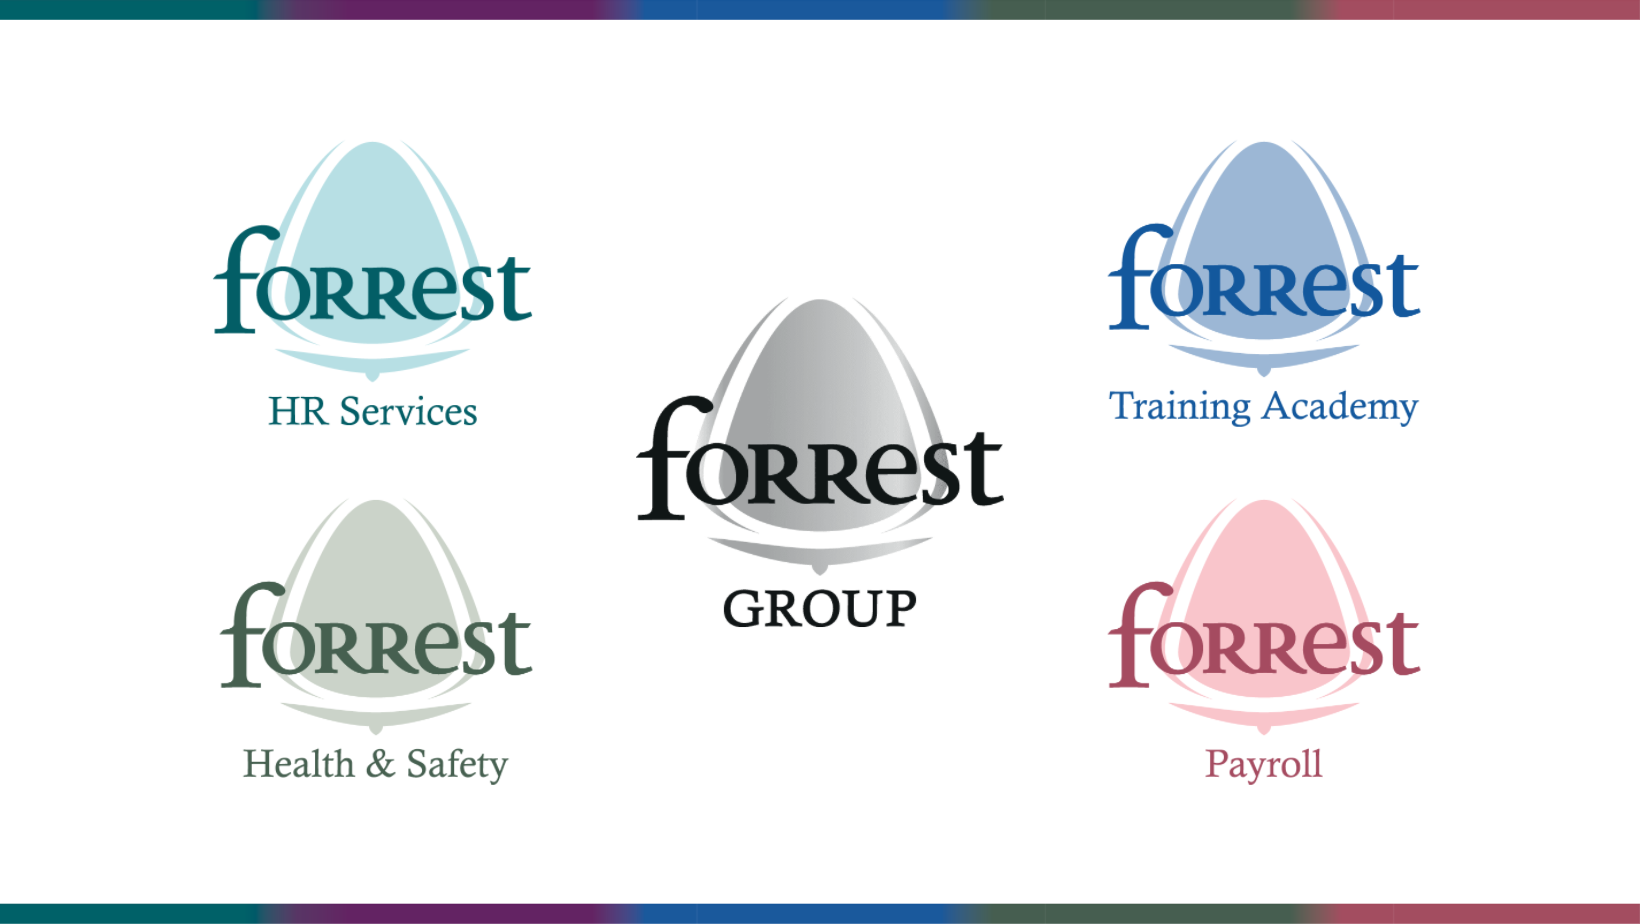 THE FORREST GROUP